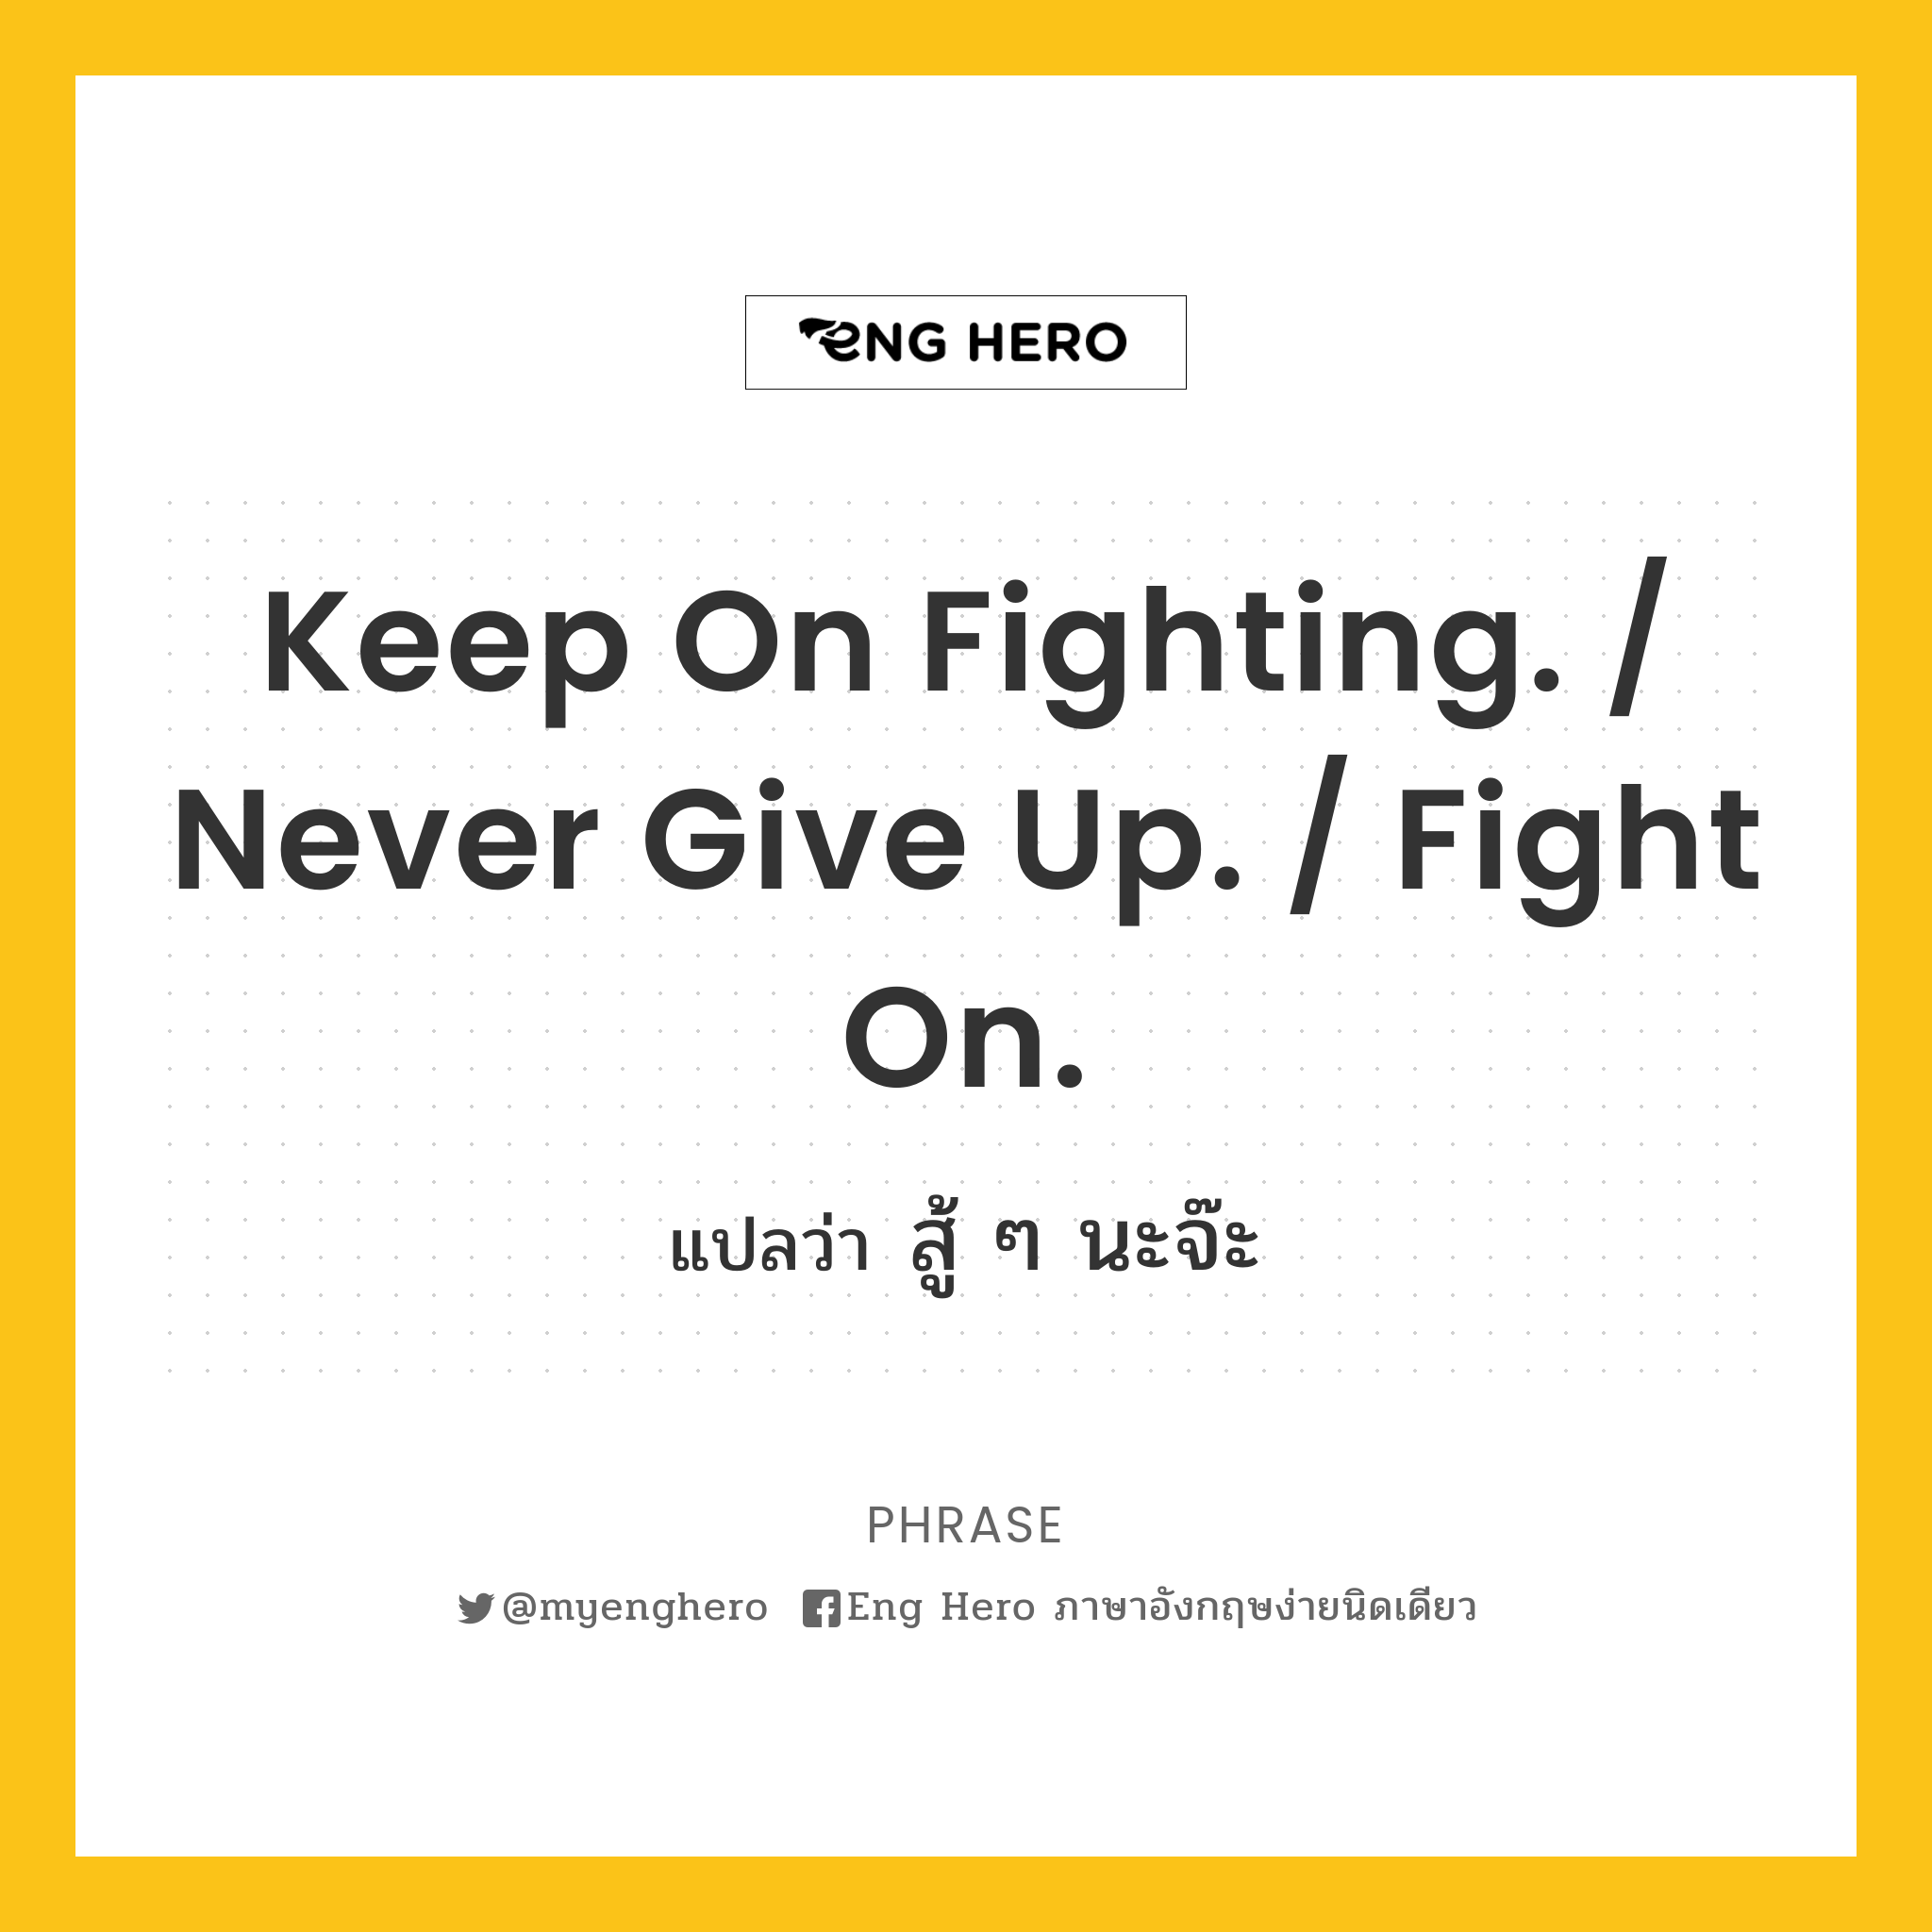 Keep on fighting. / Never give up. / Fight on.